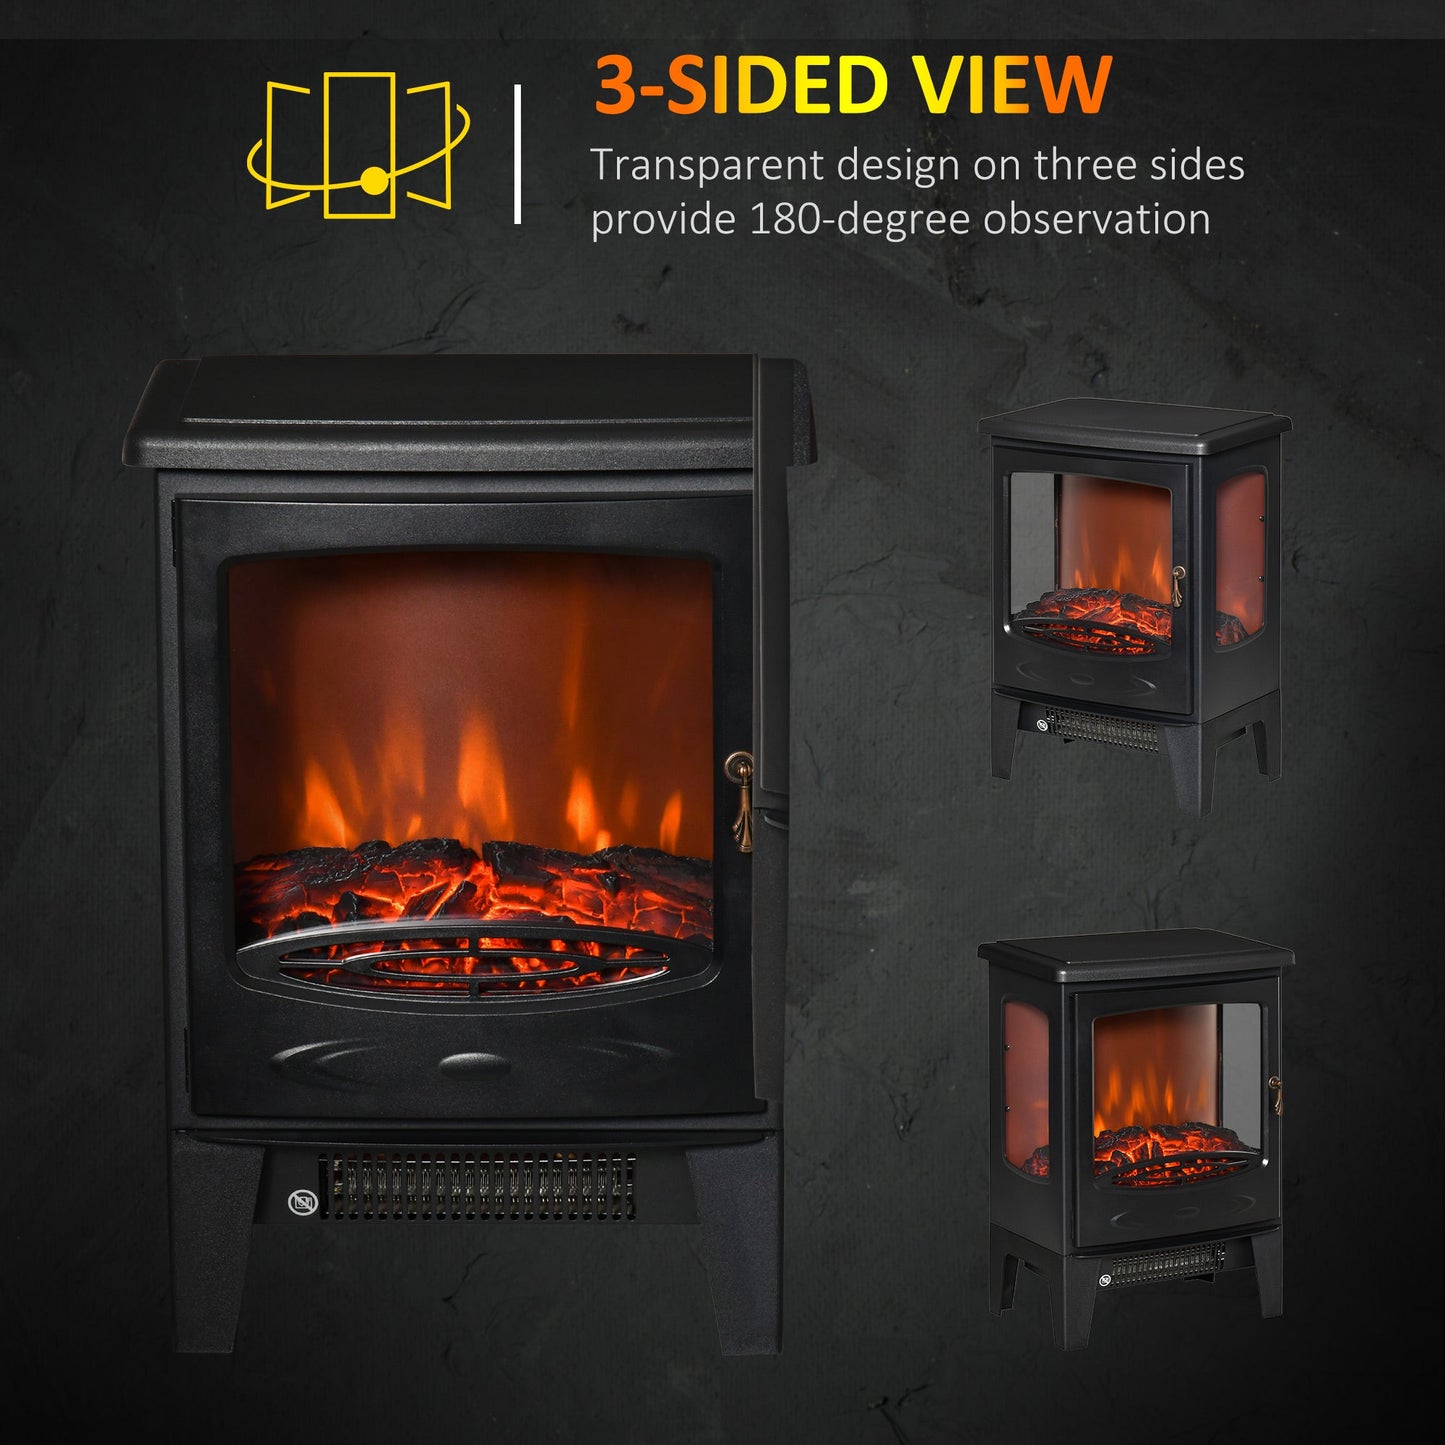 Electric Fireplace Heater, Freestanding Fireplace Stove with Realistic Adjustable Flame Effect and Adjustable Temperature, Overheating Safety Protection, 750W/1500W, Black at Gallery Canada